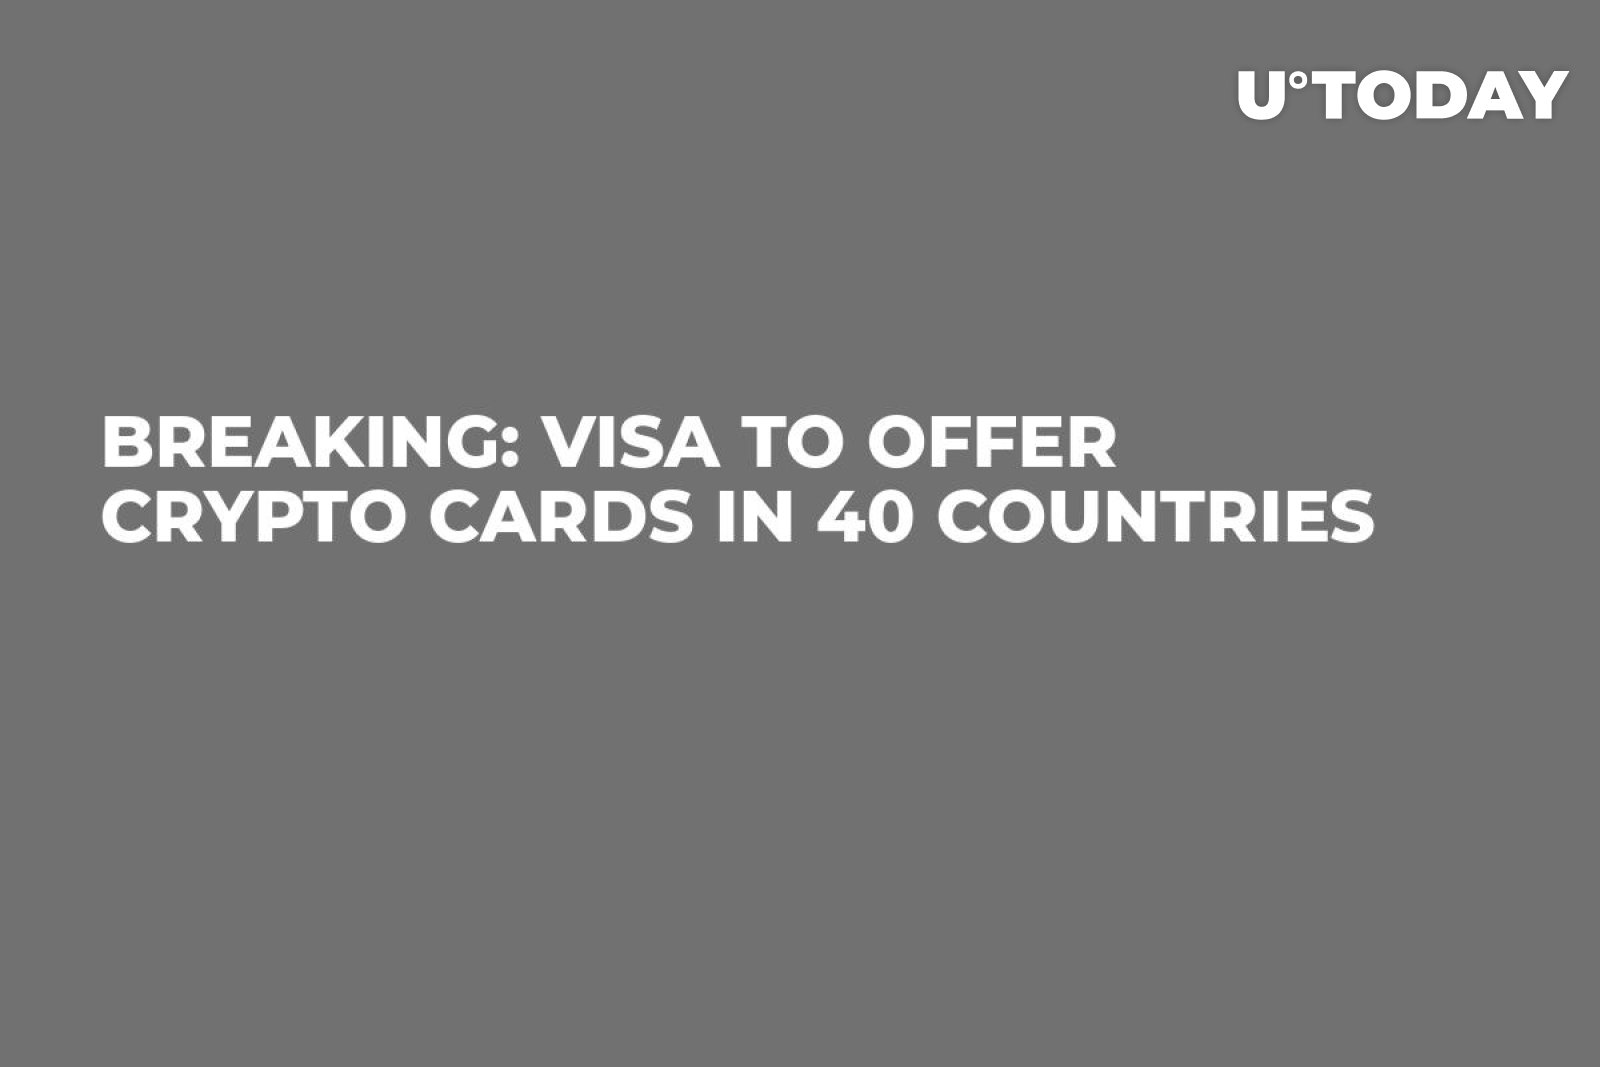 Breaking: Visa to Offer Crypto Cards in 40 Countries